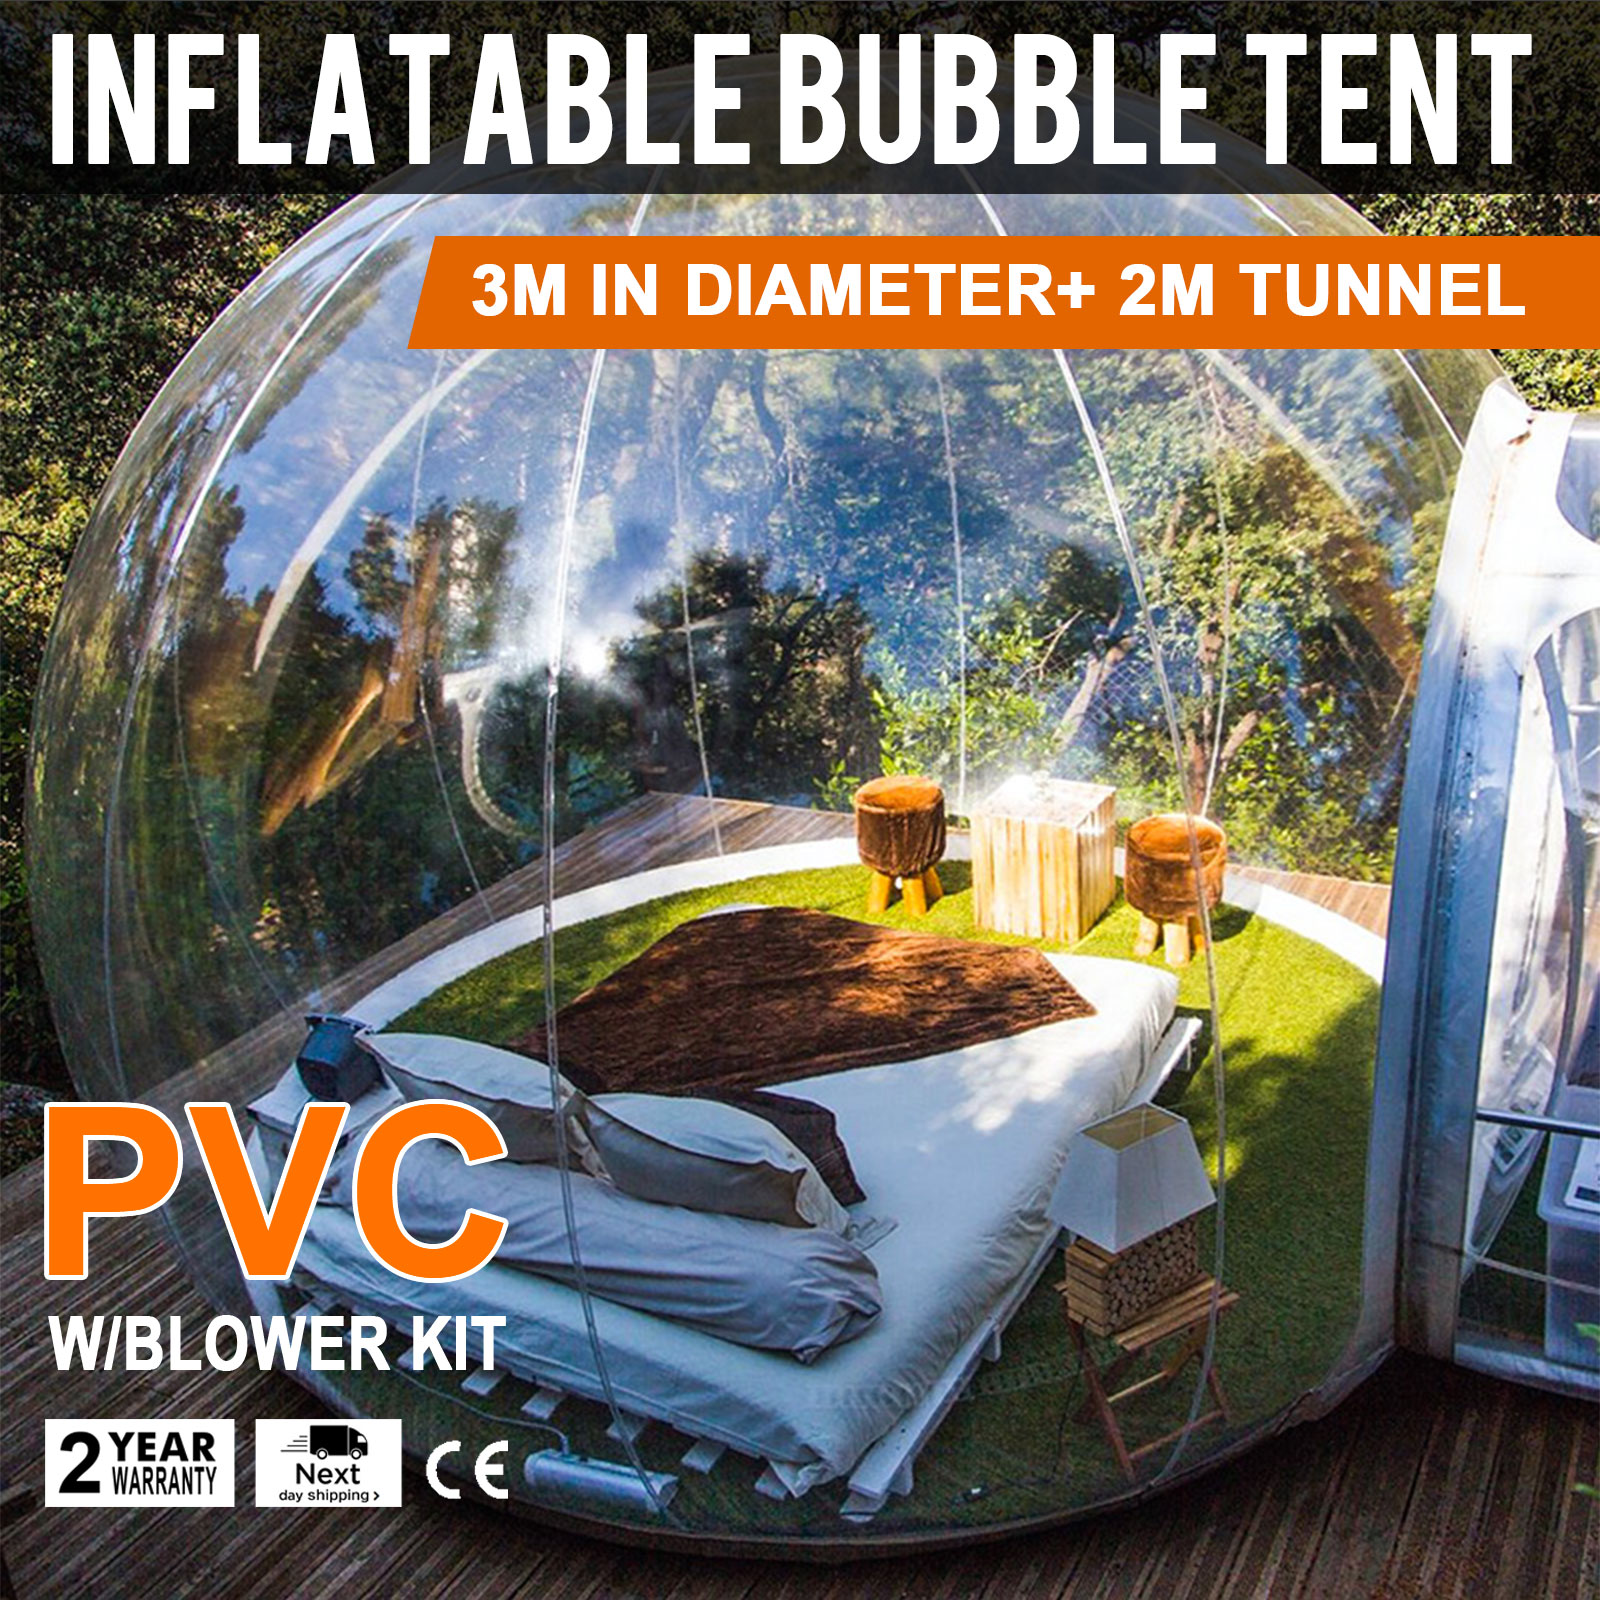 NEW LUXURY Outdoor White Tunnel Clear Dome Inflatable Bubble Tent Changing Room